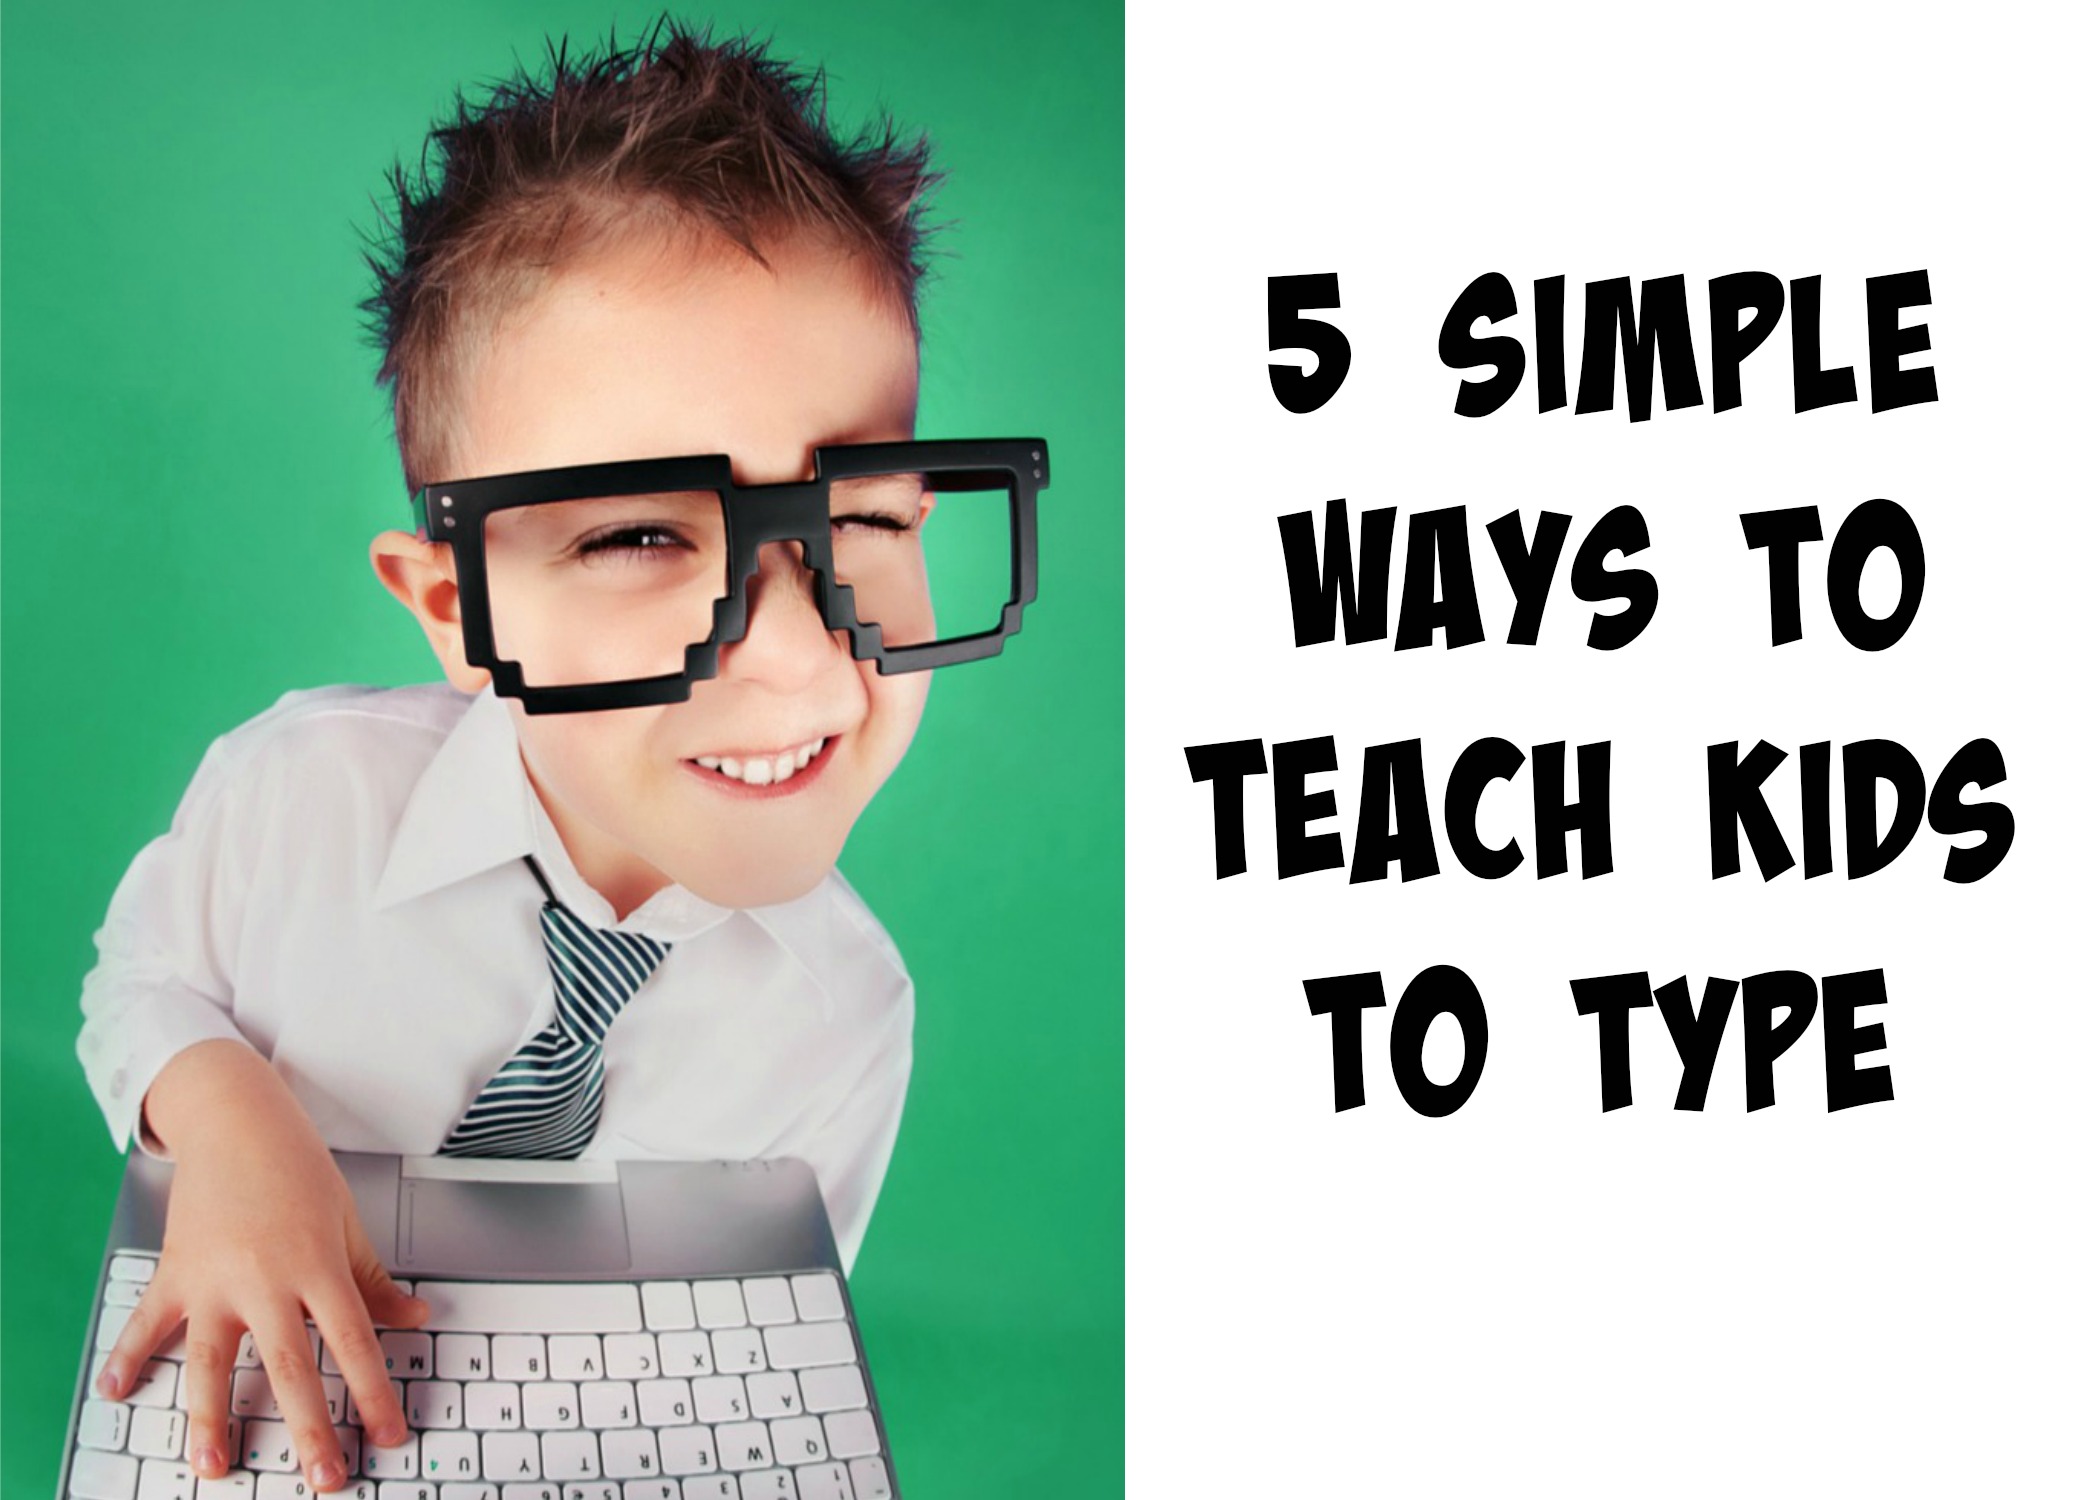 5-simple-ways-to-teach-kids-to-type-the-things-i-love-most